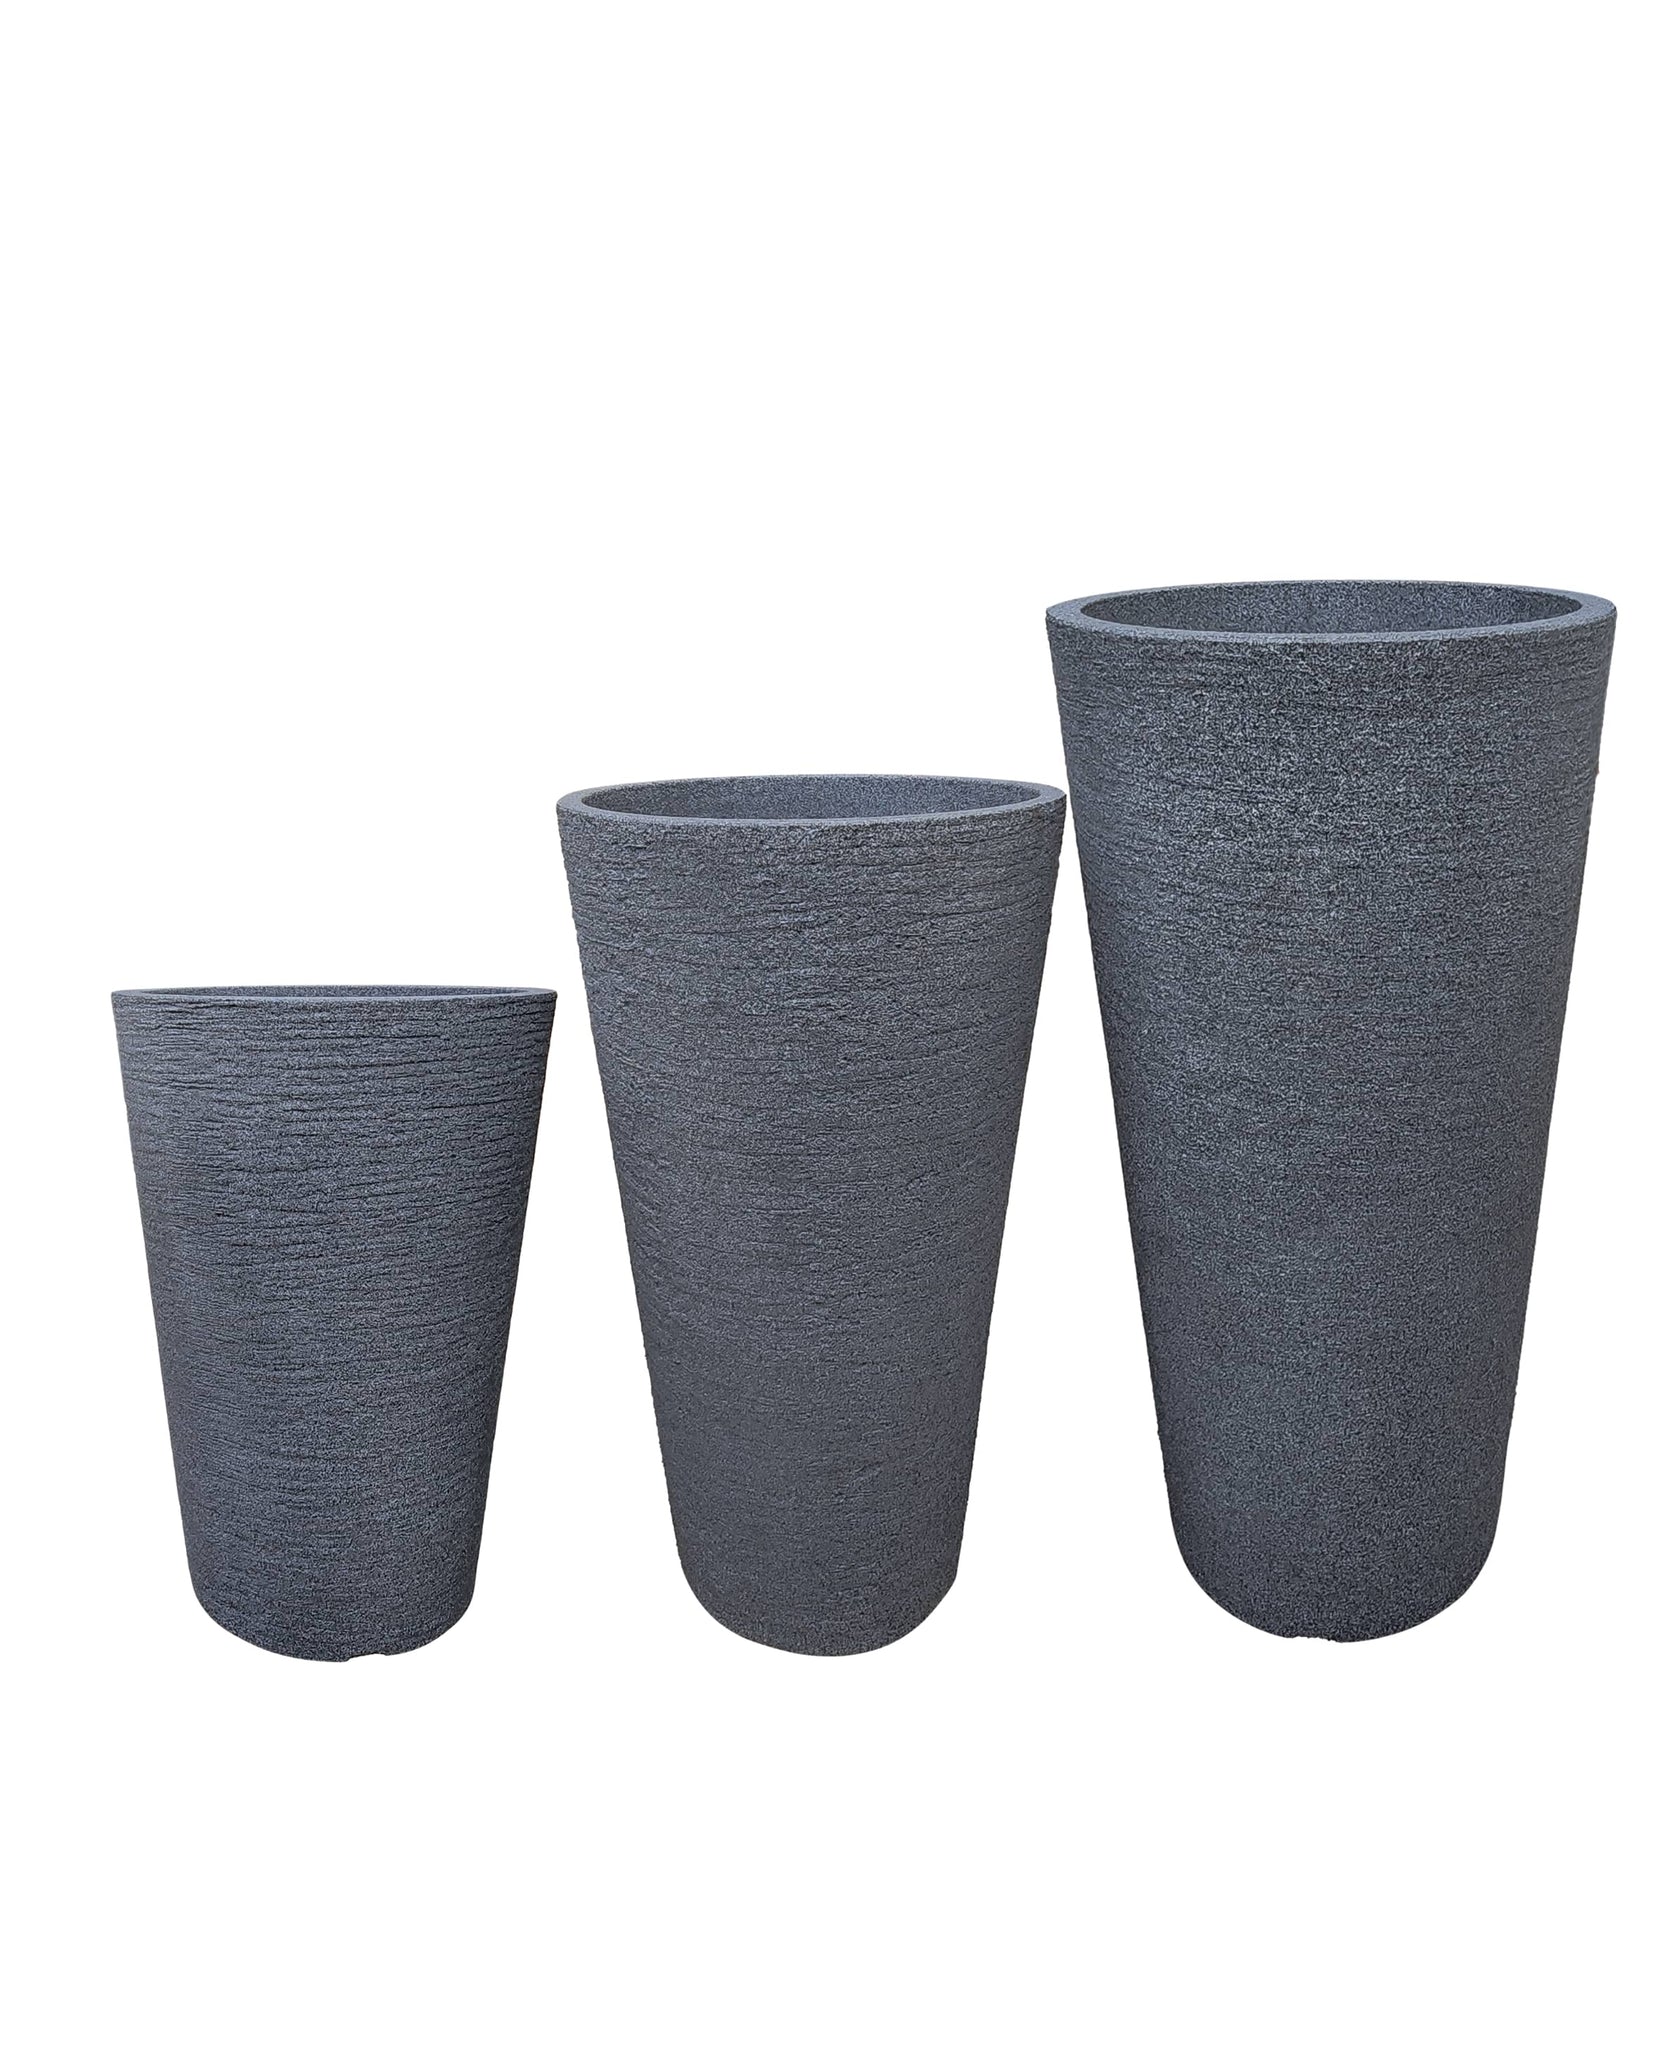 Small, medium and large European Conic Japi planters in a row. Charcoal colour, textured finish. Modern planters suitable for any style of decor.